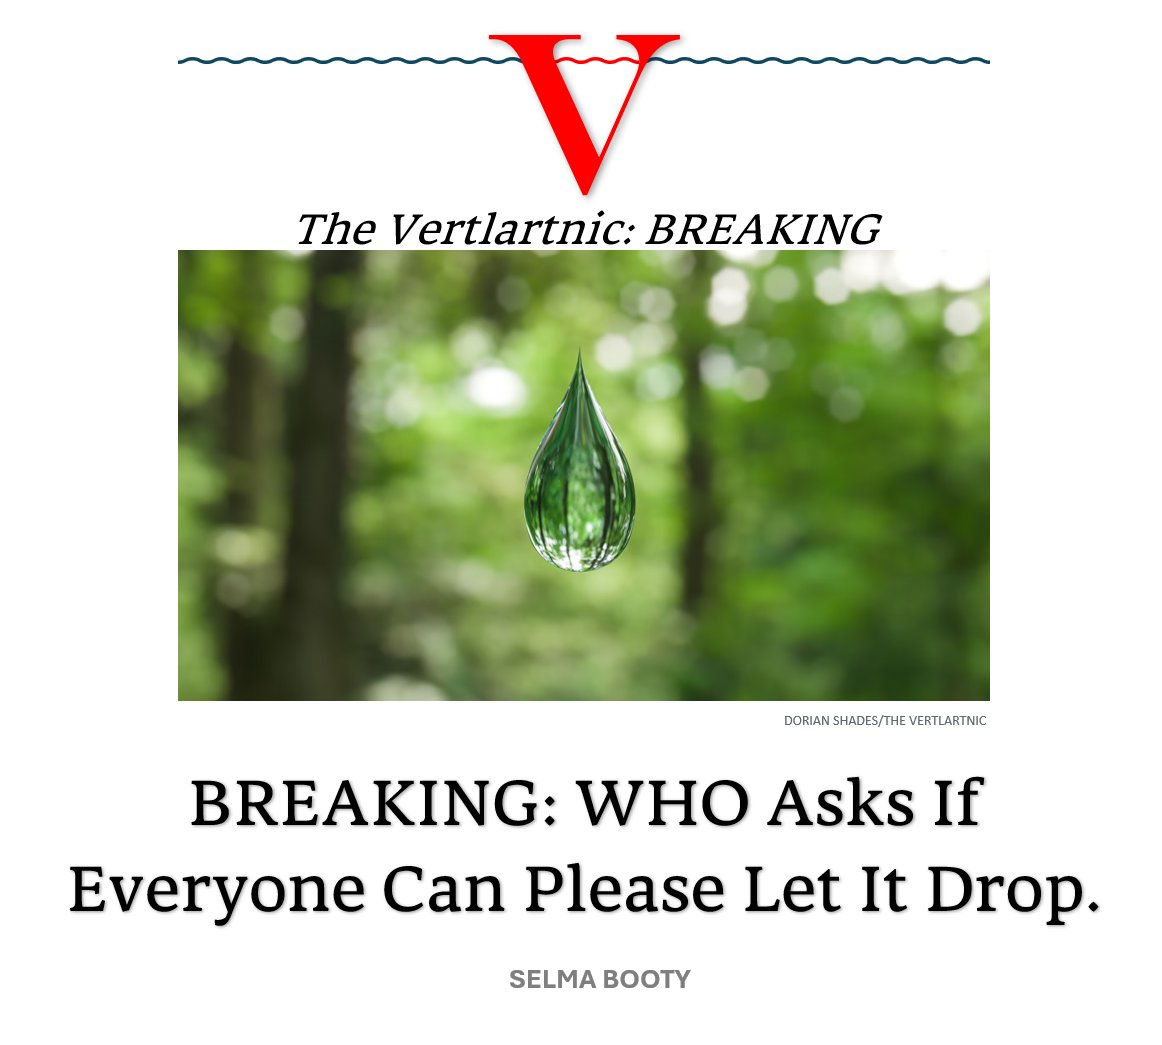 BREAKING: WHO Asks If Everyone Can Please Let It Drop.